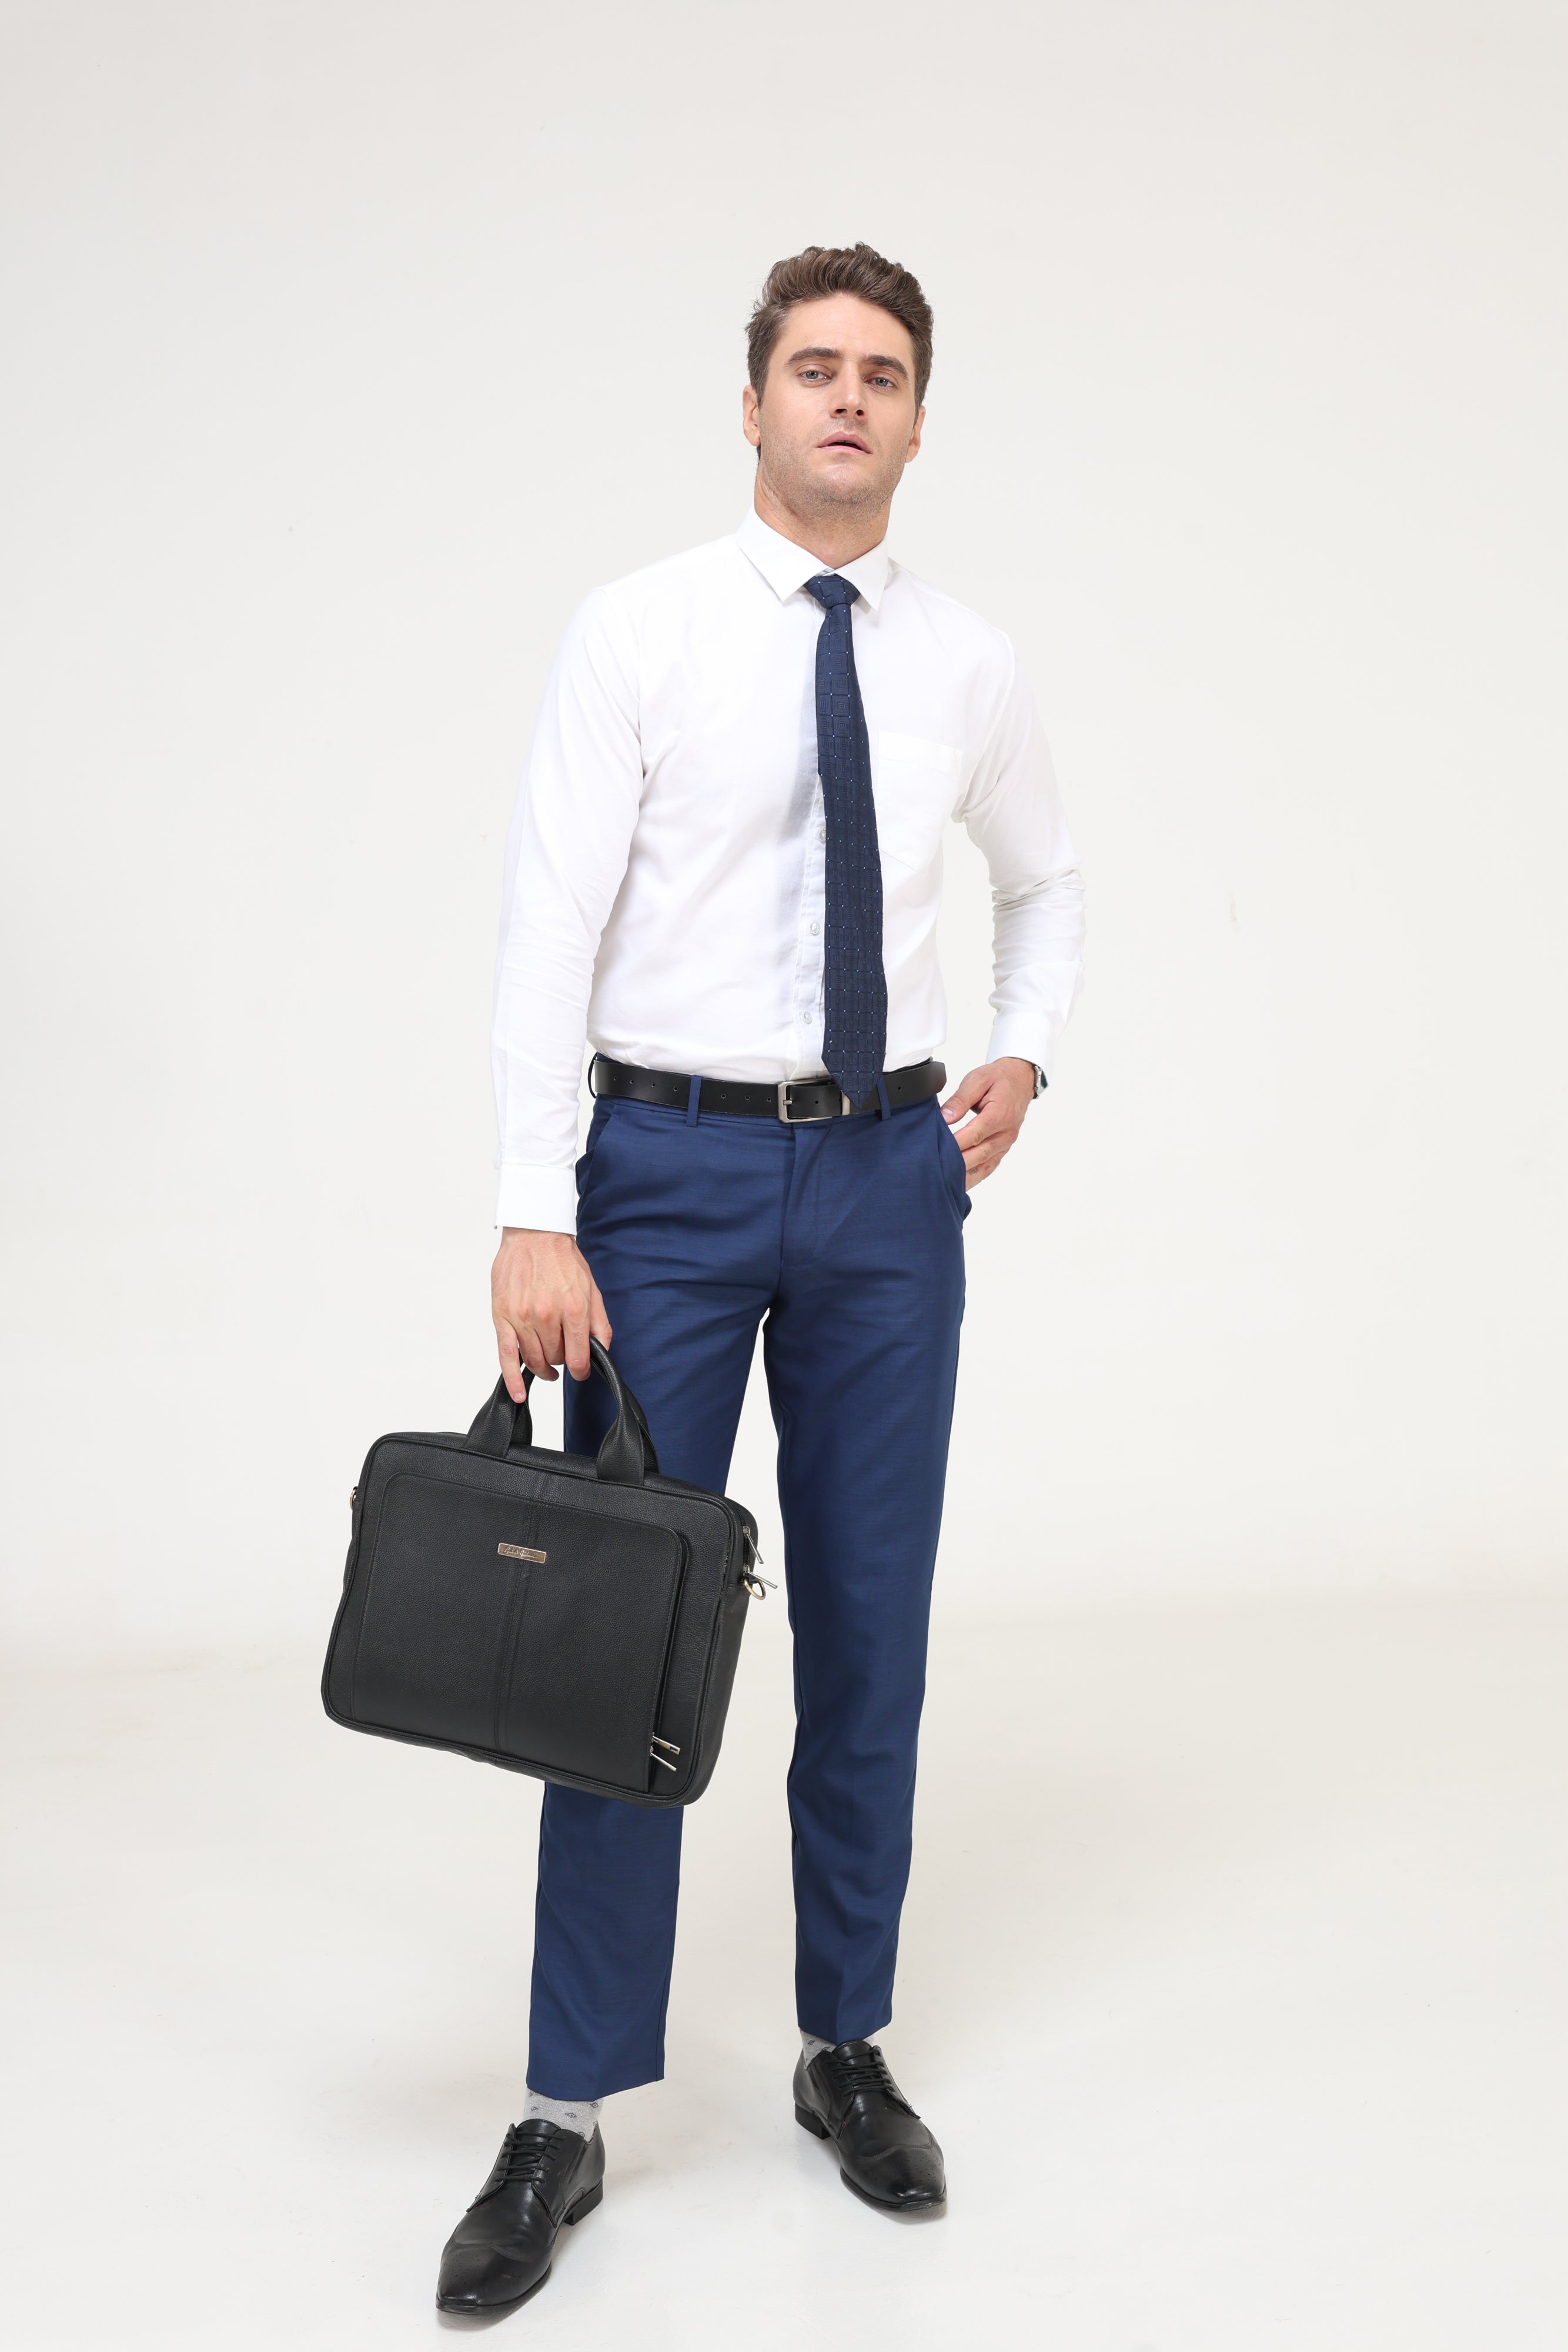 Man wearing Moonlite White Oxford shirt and blue trousers, holding a black briefcase. Stylish menswear, premium white shirts, branded shirts for men.